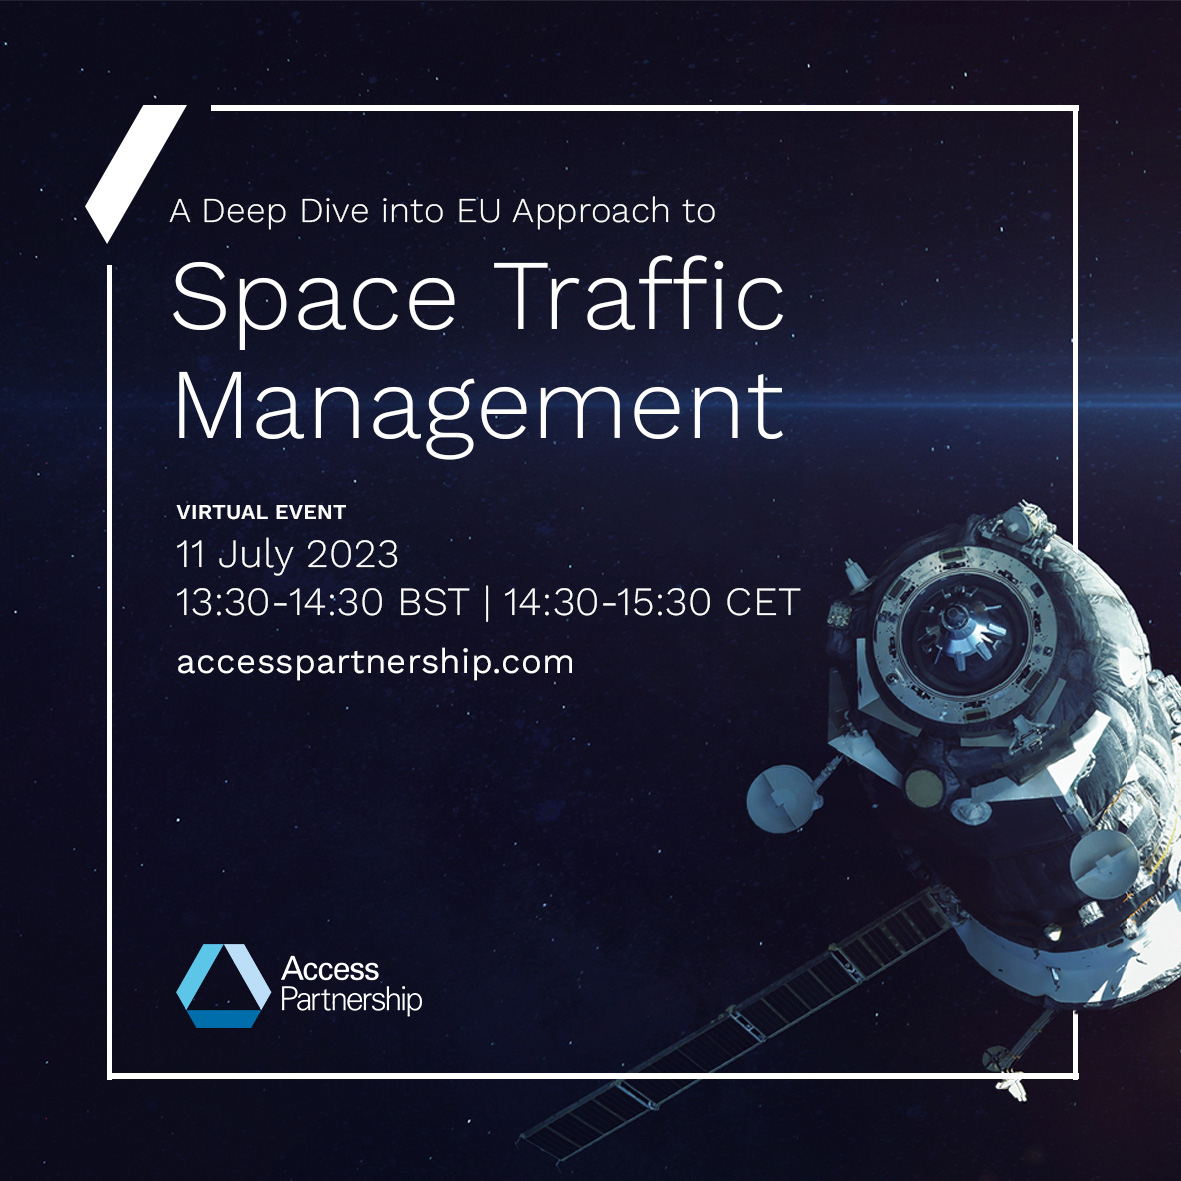 A Deep Dive into EU Approach to Space Traffic Management